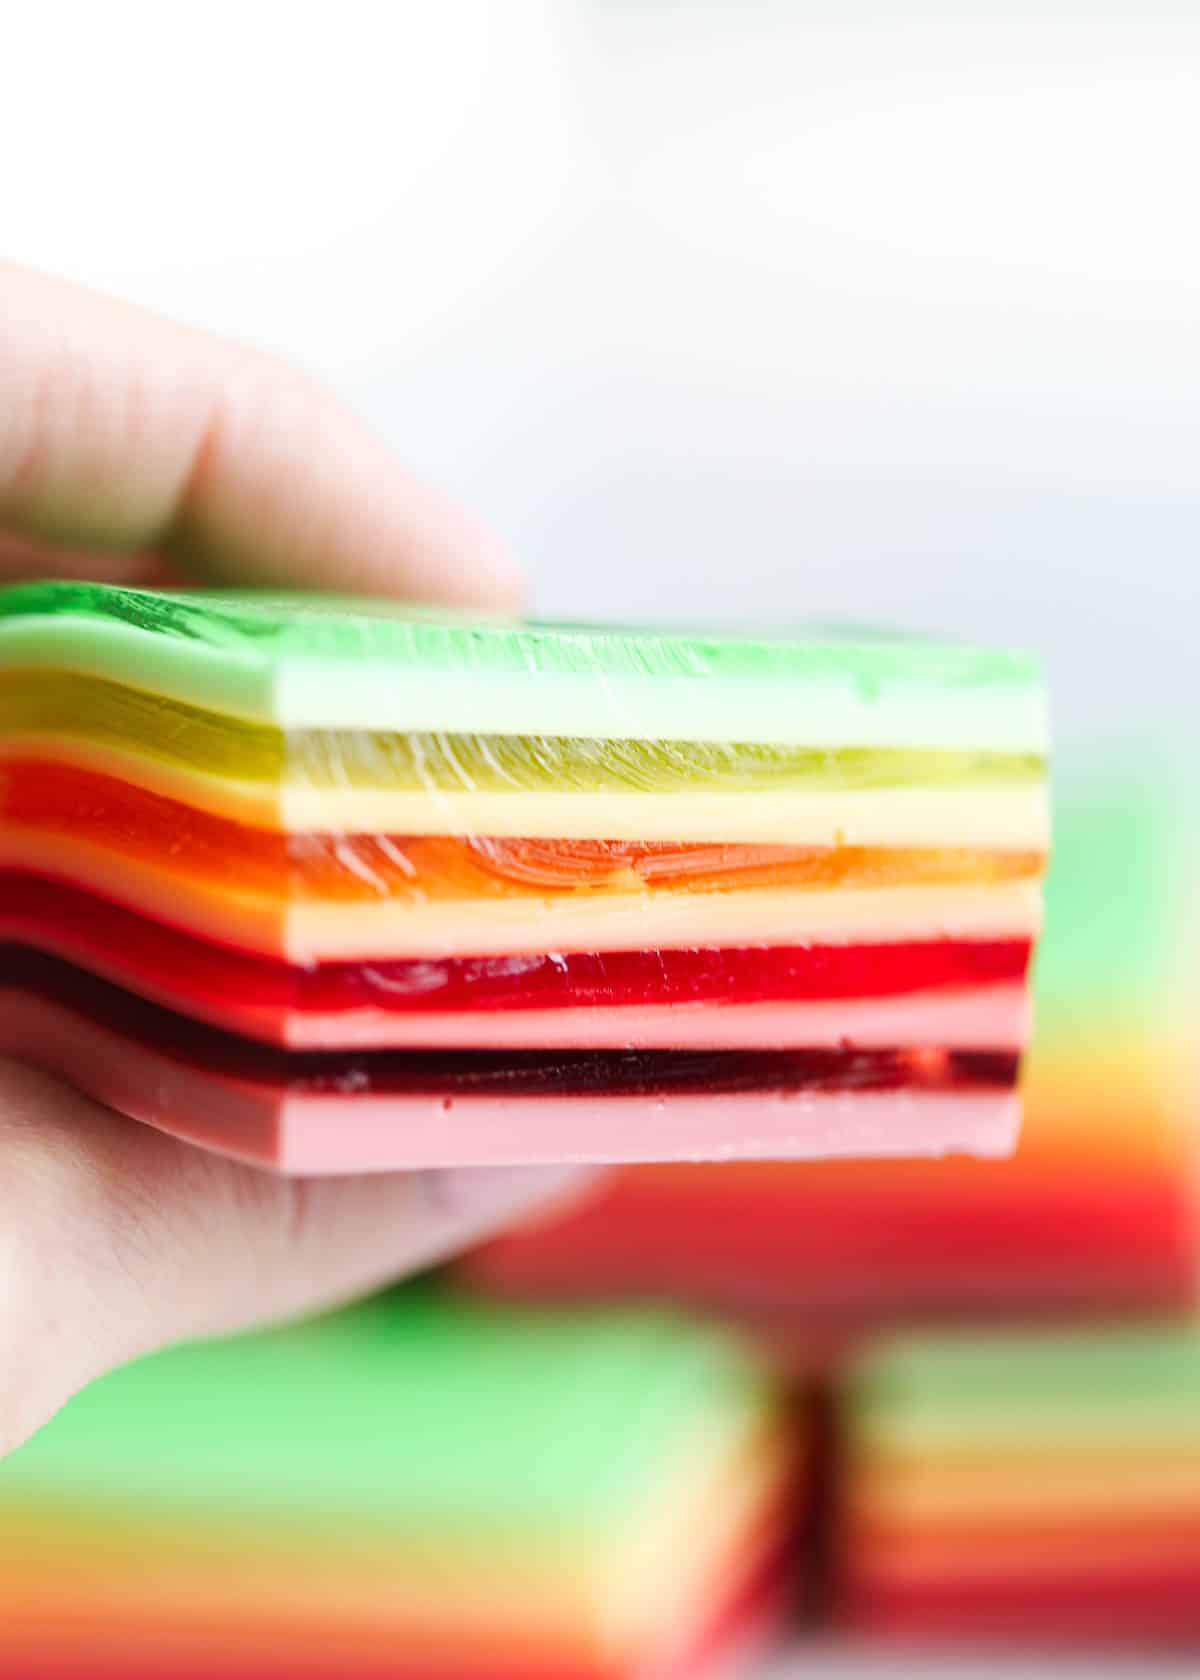 Rainbow jello being held up by a hand. 